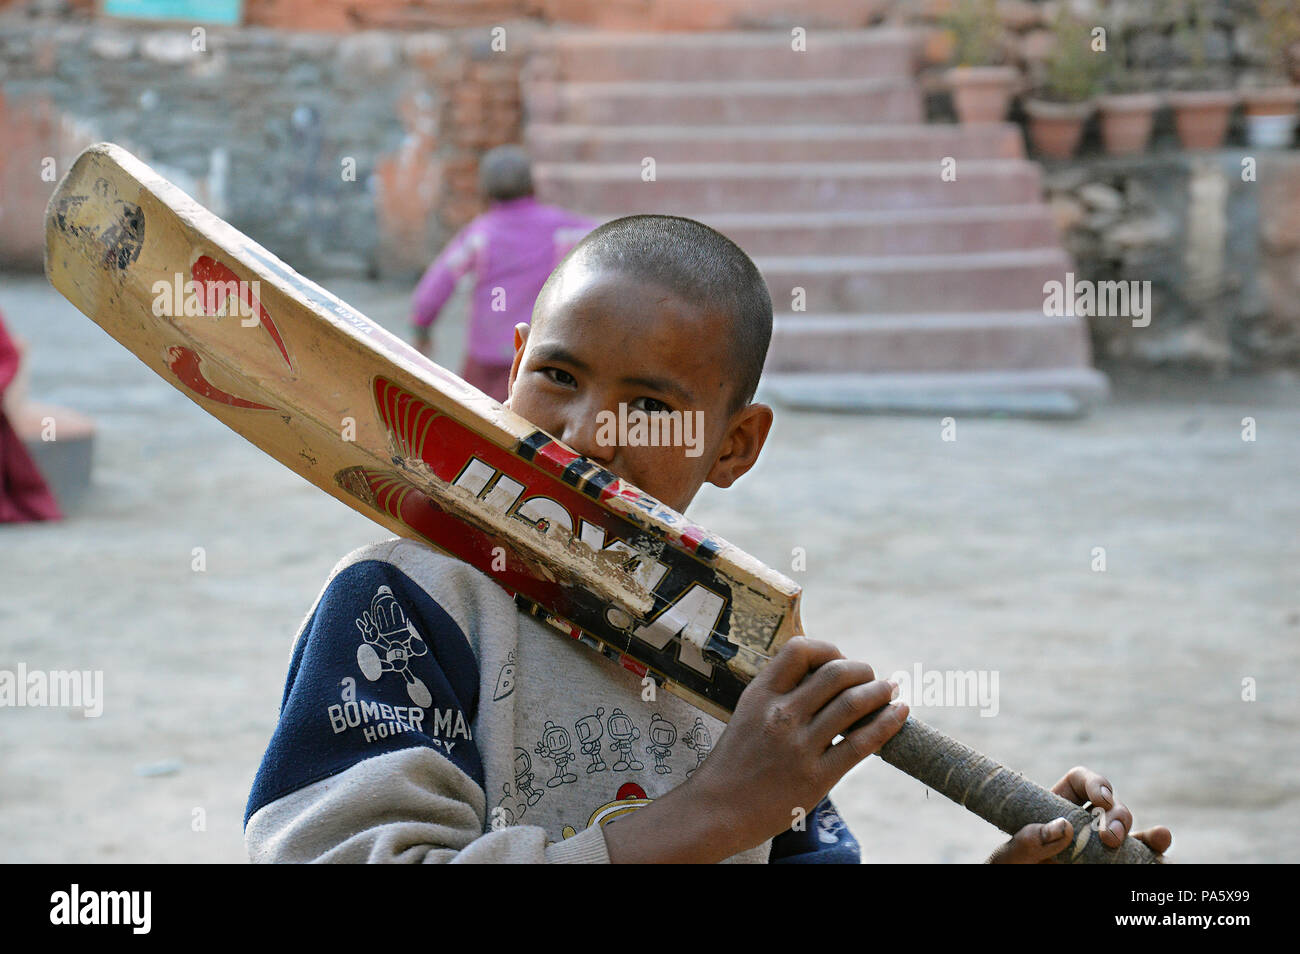 A boy kissing an old cricket bat at a school in Kagbeni, Lower Mustang, Nepal.11.09.2014. Stock Photo